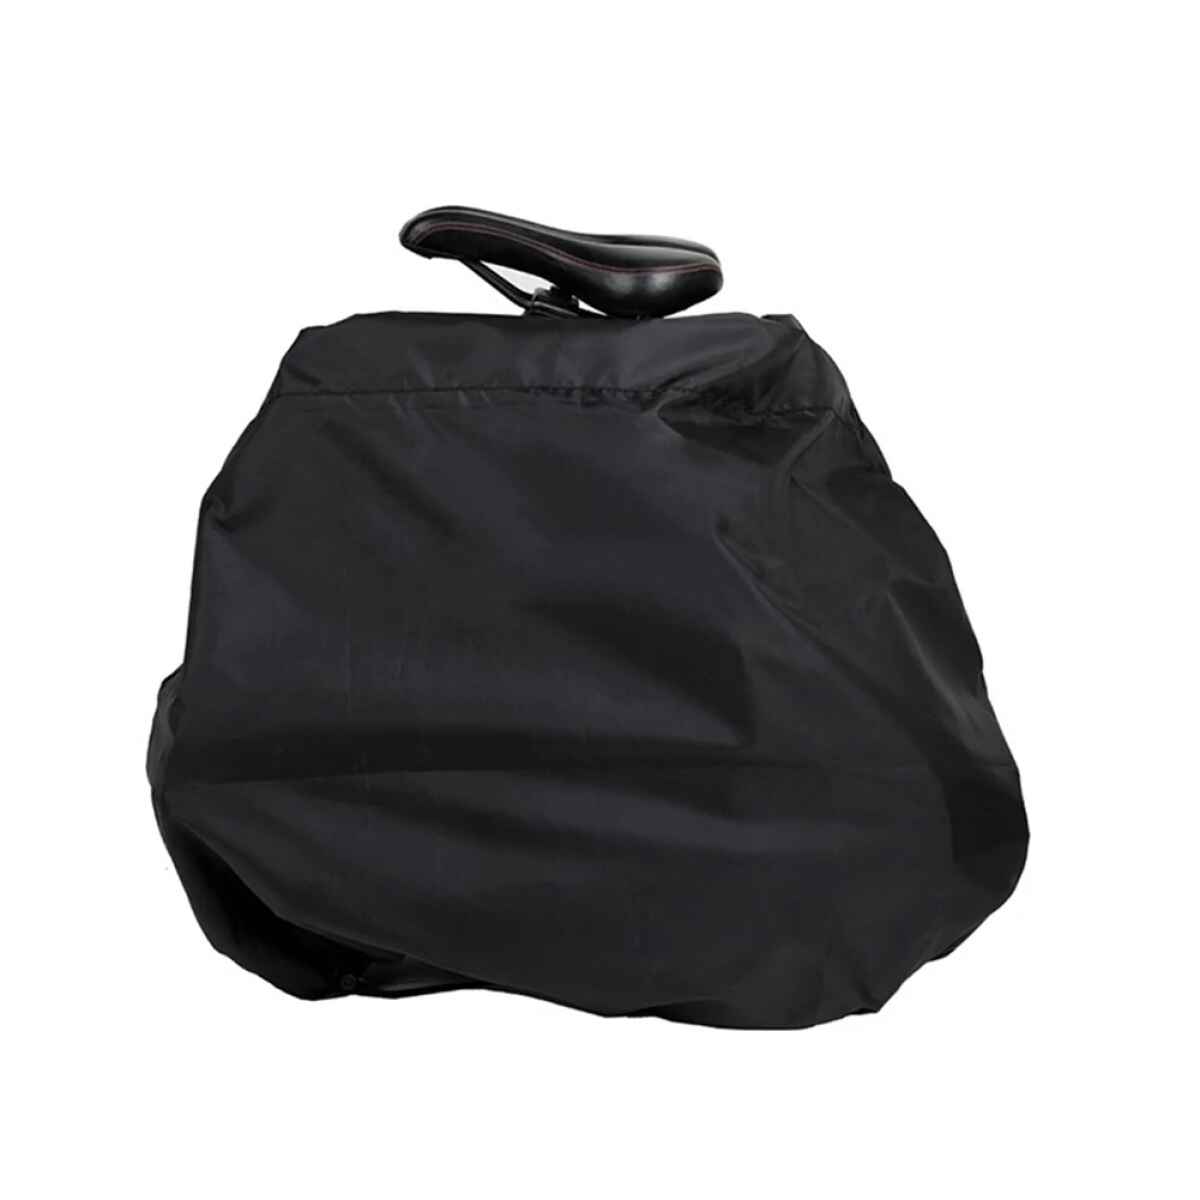 Portable folding bike store carry bag folding bike transport storage pouch waterproof protection cover2